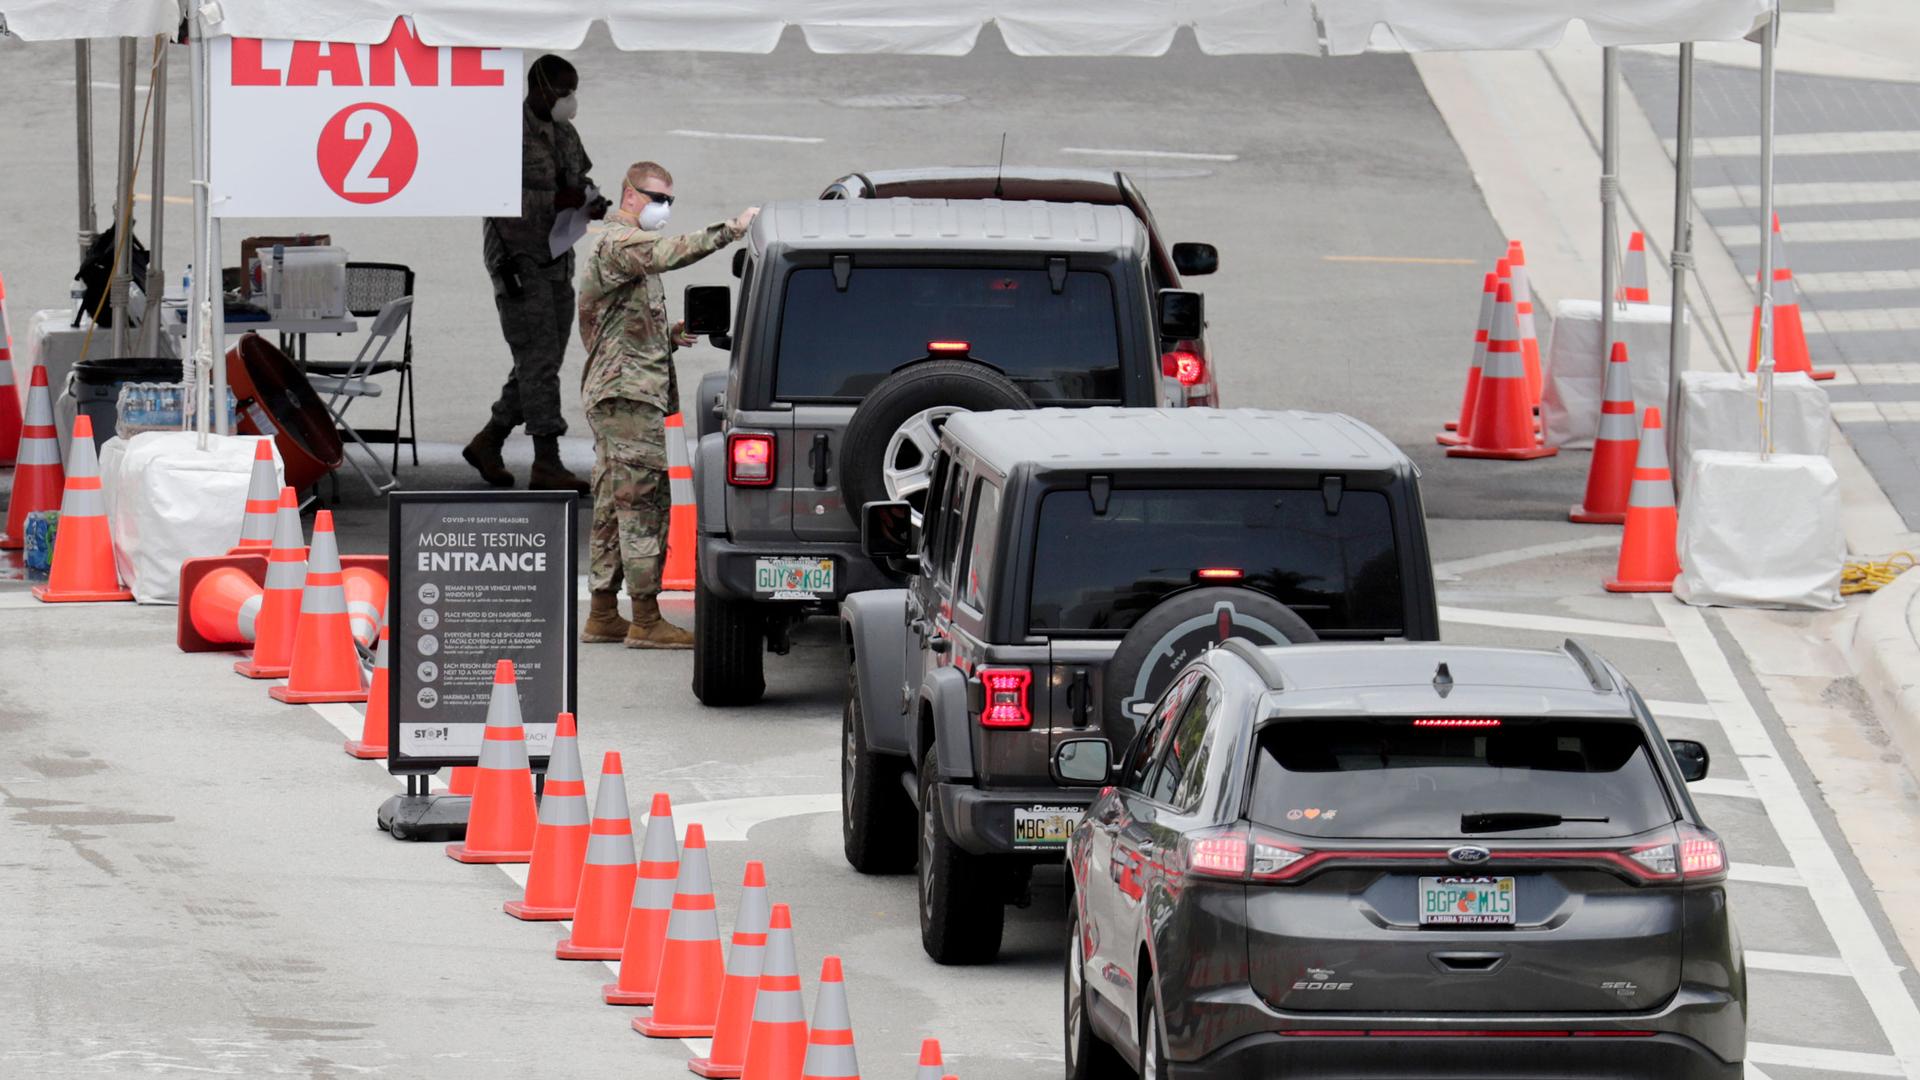 A line of vehicles are shown next to a row of orange traffic cones leading to a National Guard official at a mobile coronavirus testing facility.